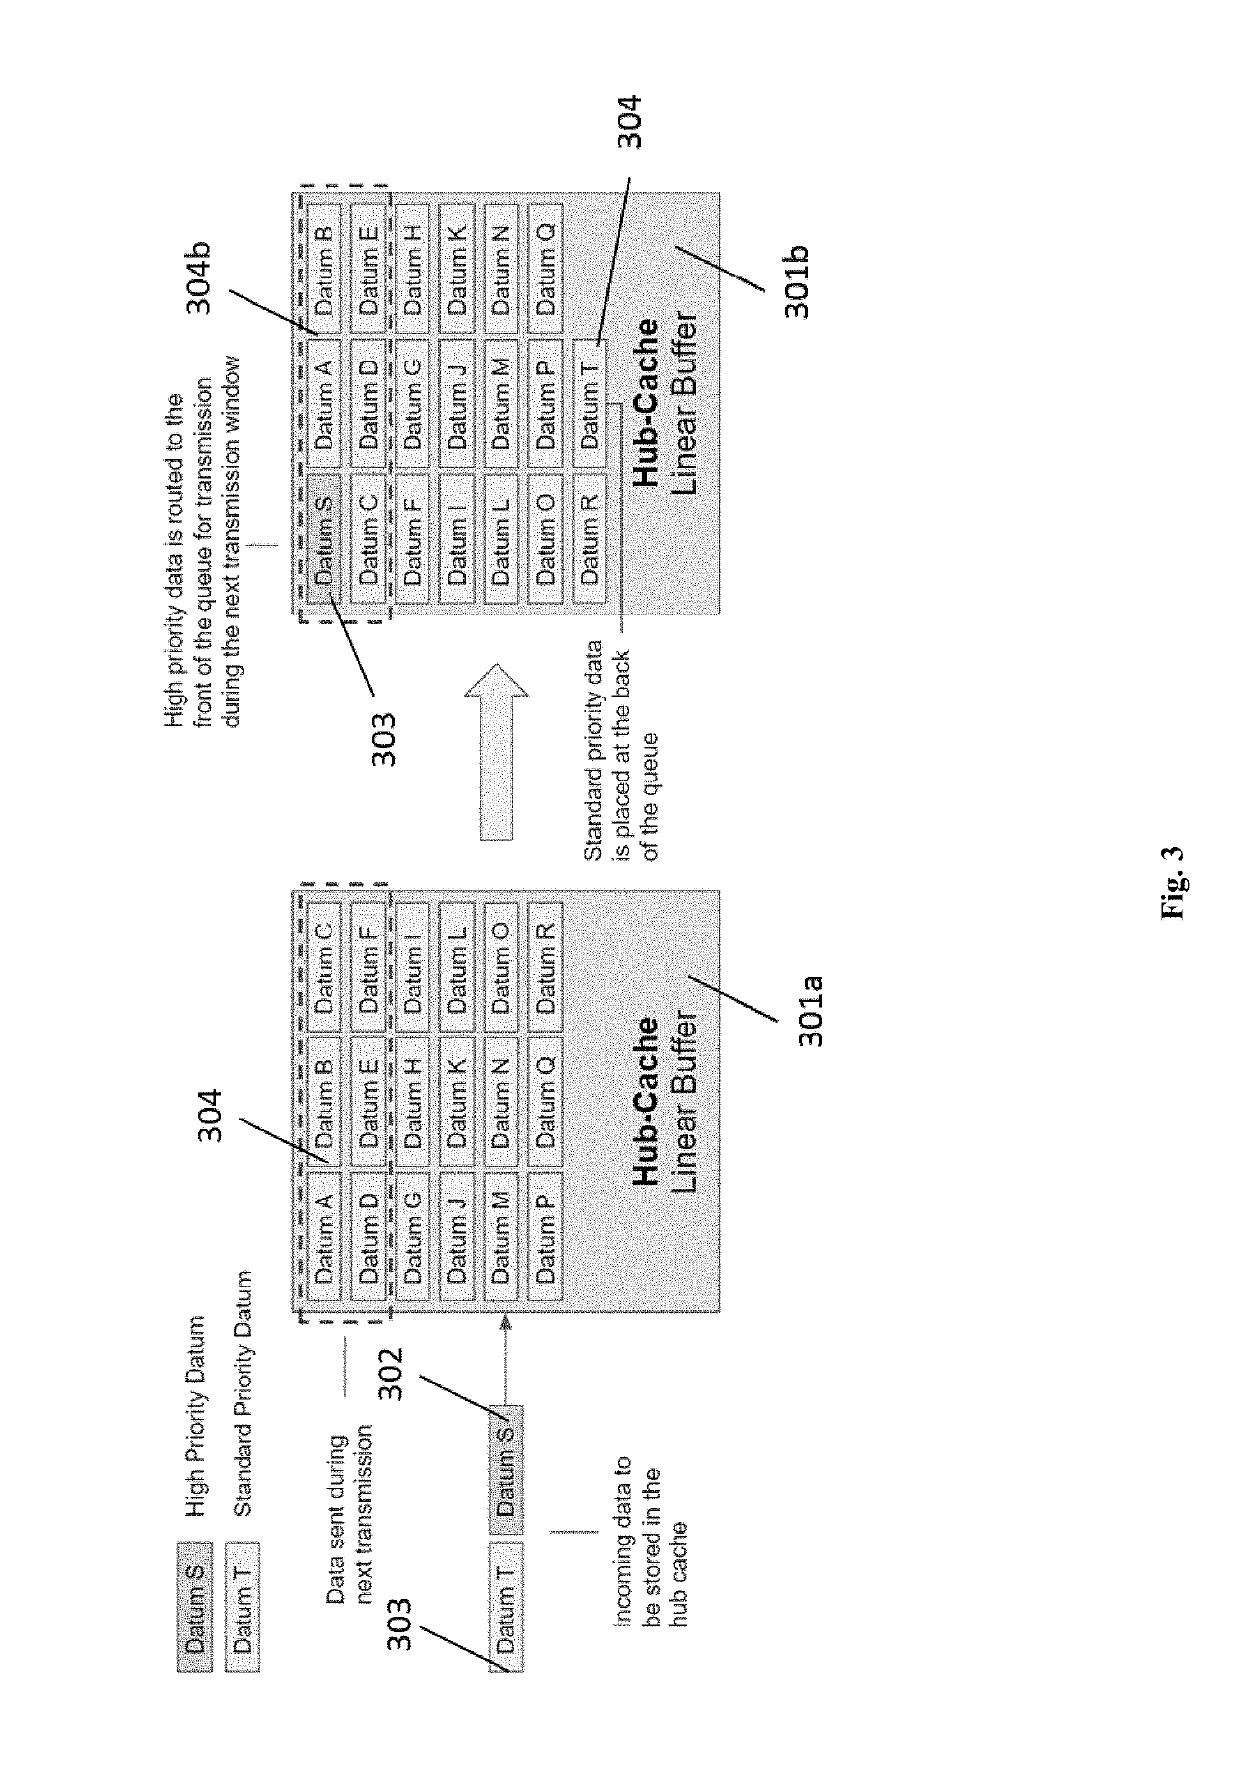 Devices and methods for specialized machine-to-machine communication transmission network modes via edge node capabilities